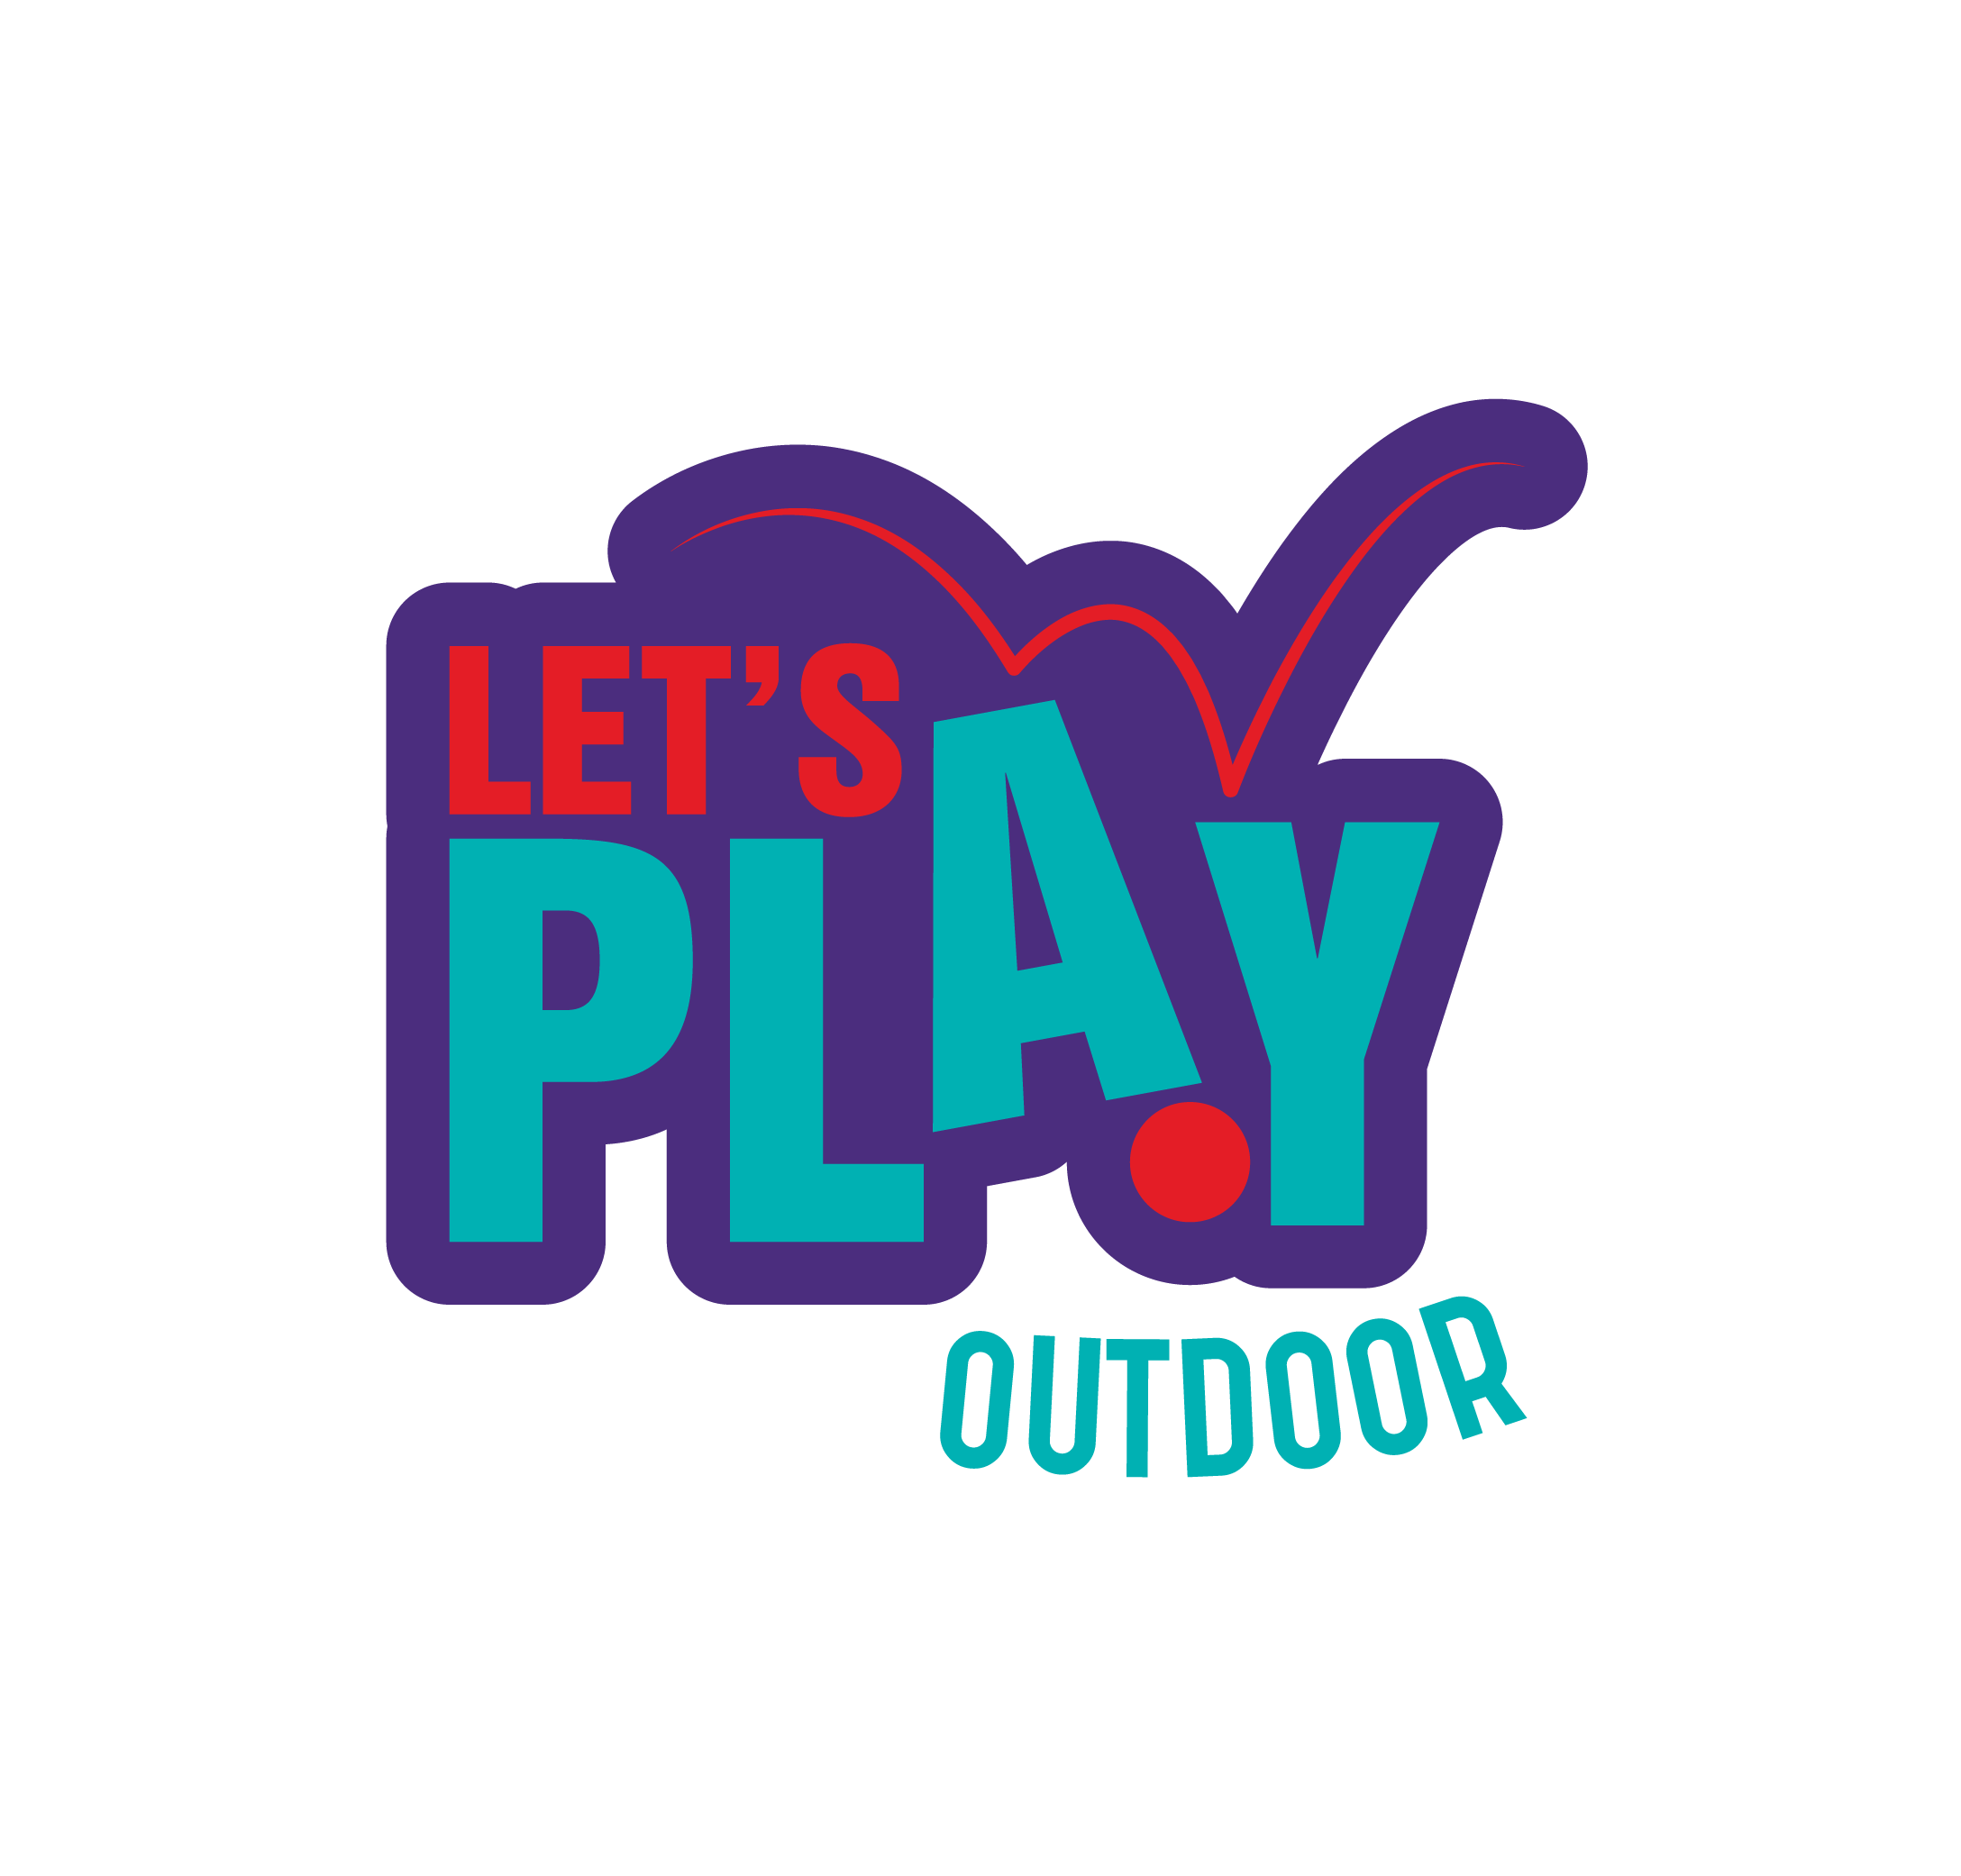 LETS PLAY OUTDOOR